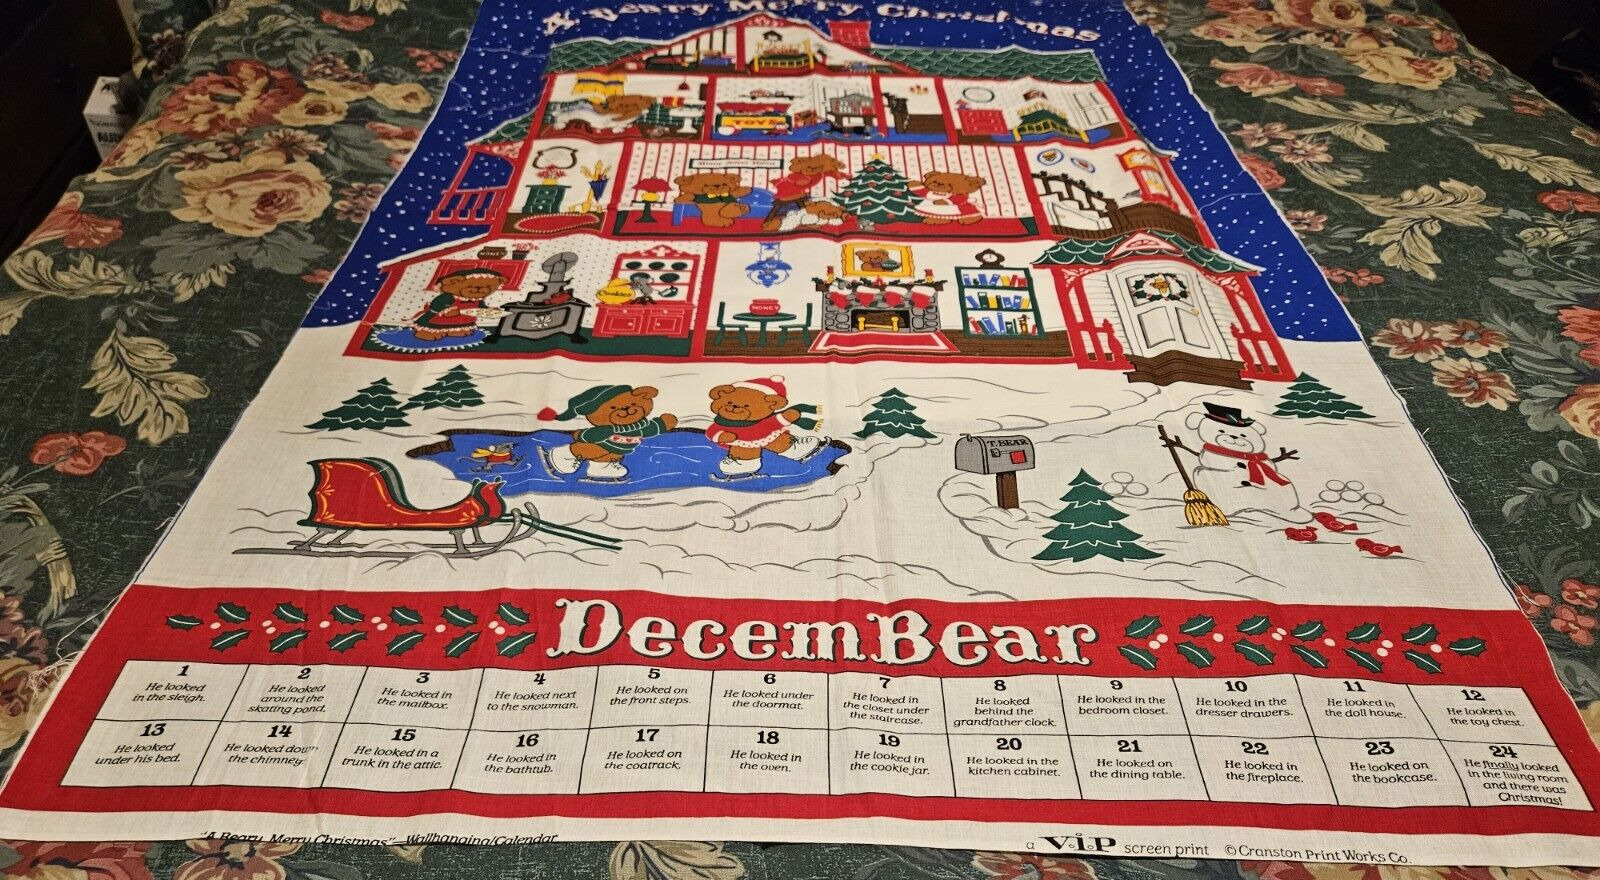 A Beary Merry Christmas Fabric Wall Hanging Advent Calendar Finished With BEAR